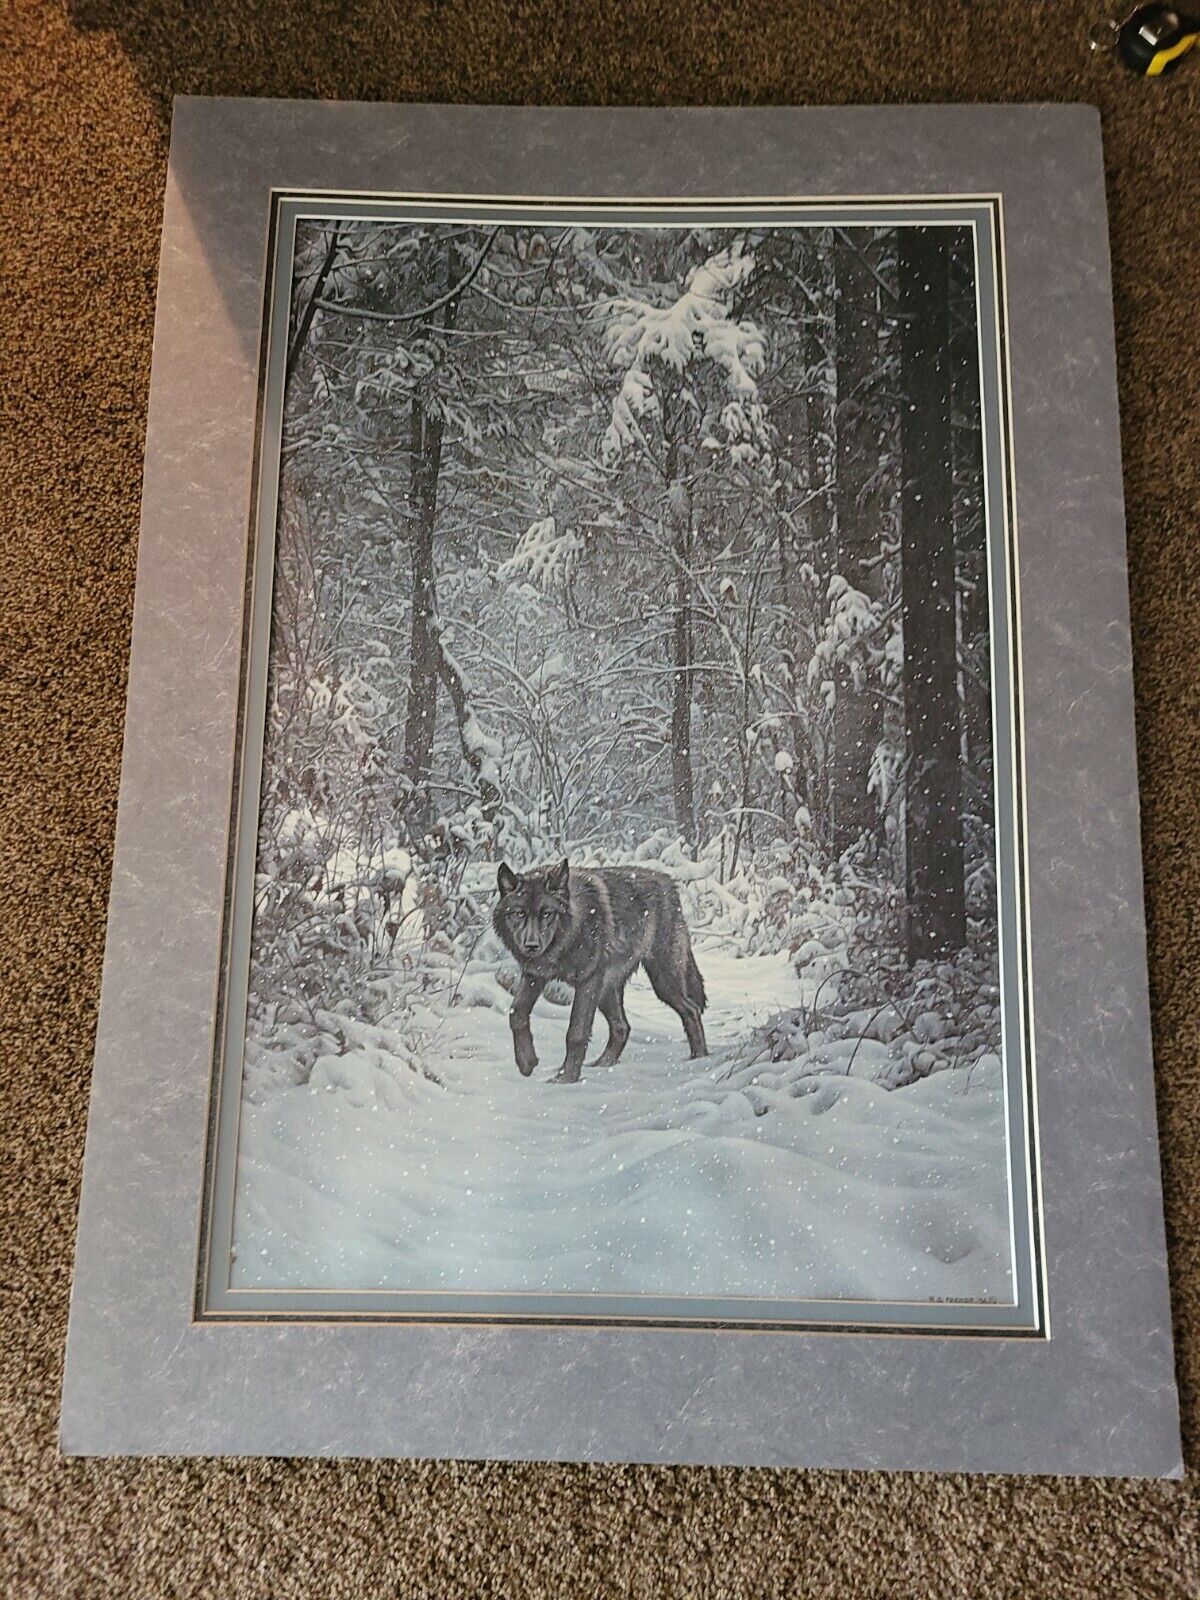 Winter Encounter by Ron Parker 37x27 matted unframed  certificate authentication